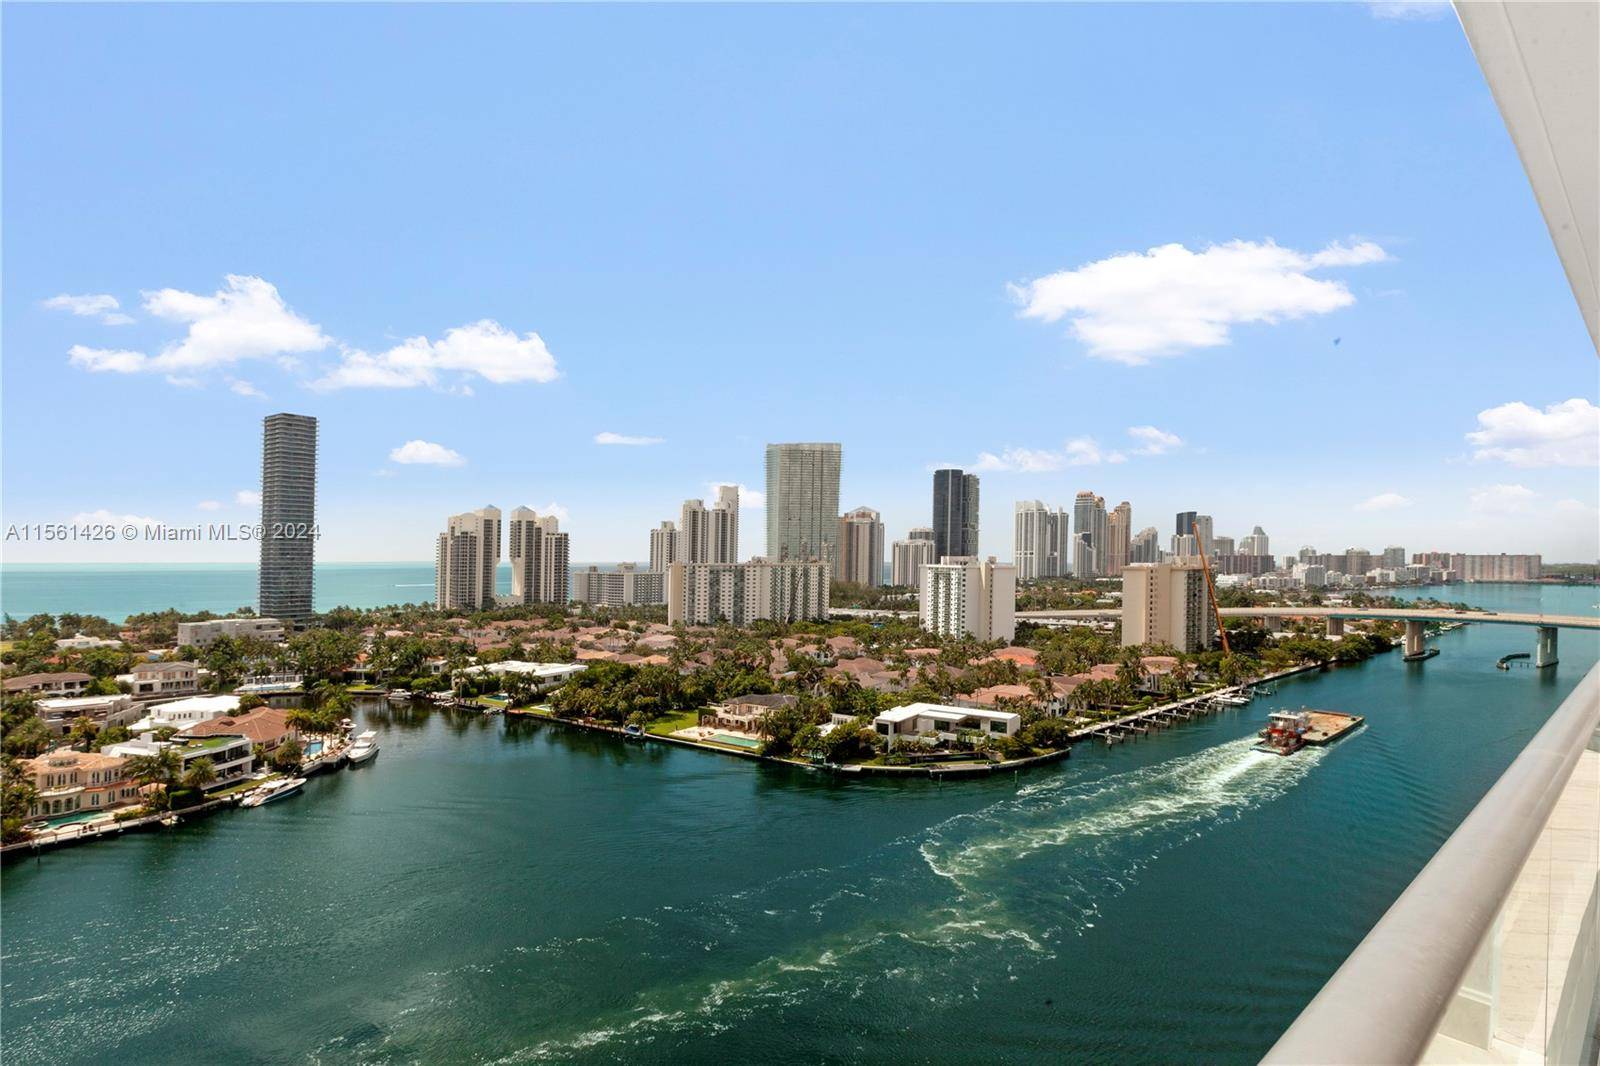 Welcome to this exquisite, fully furnished 20th floor apartment in Turnberry Isle North Tower.